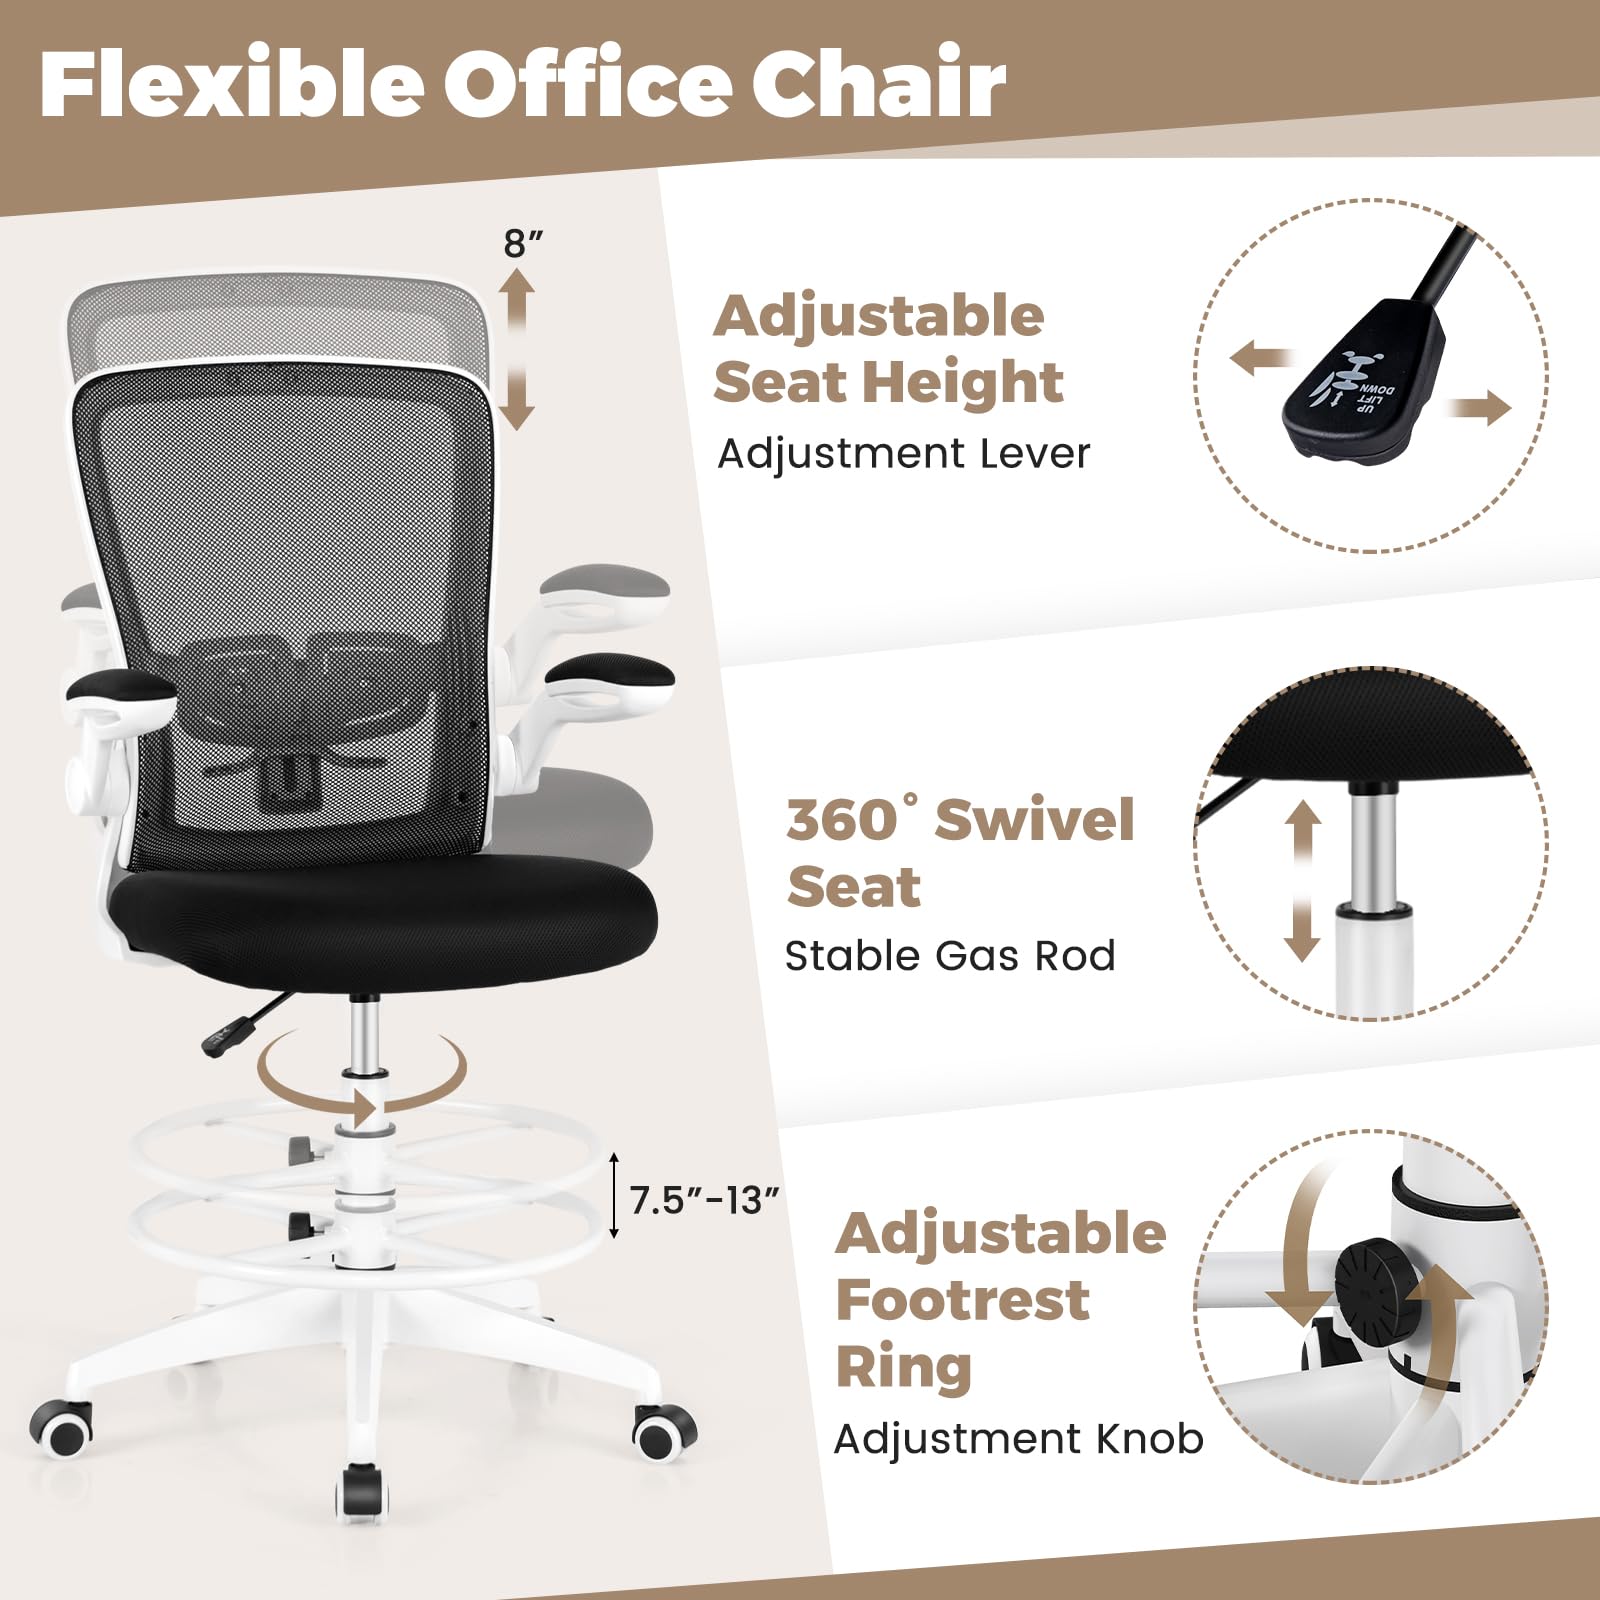 Drafting Chair High Back Office Chairs